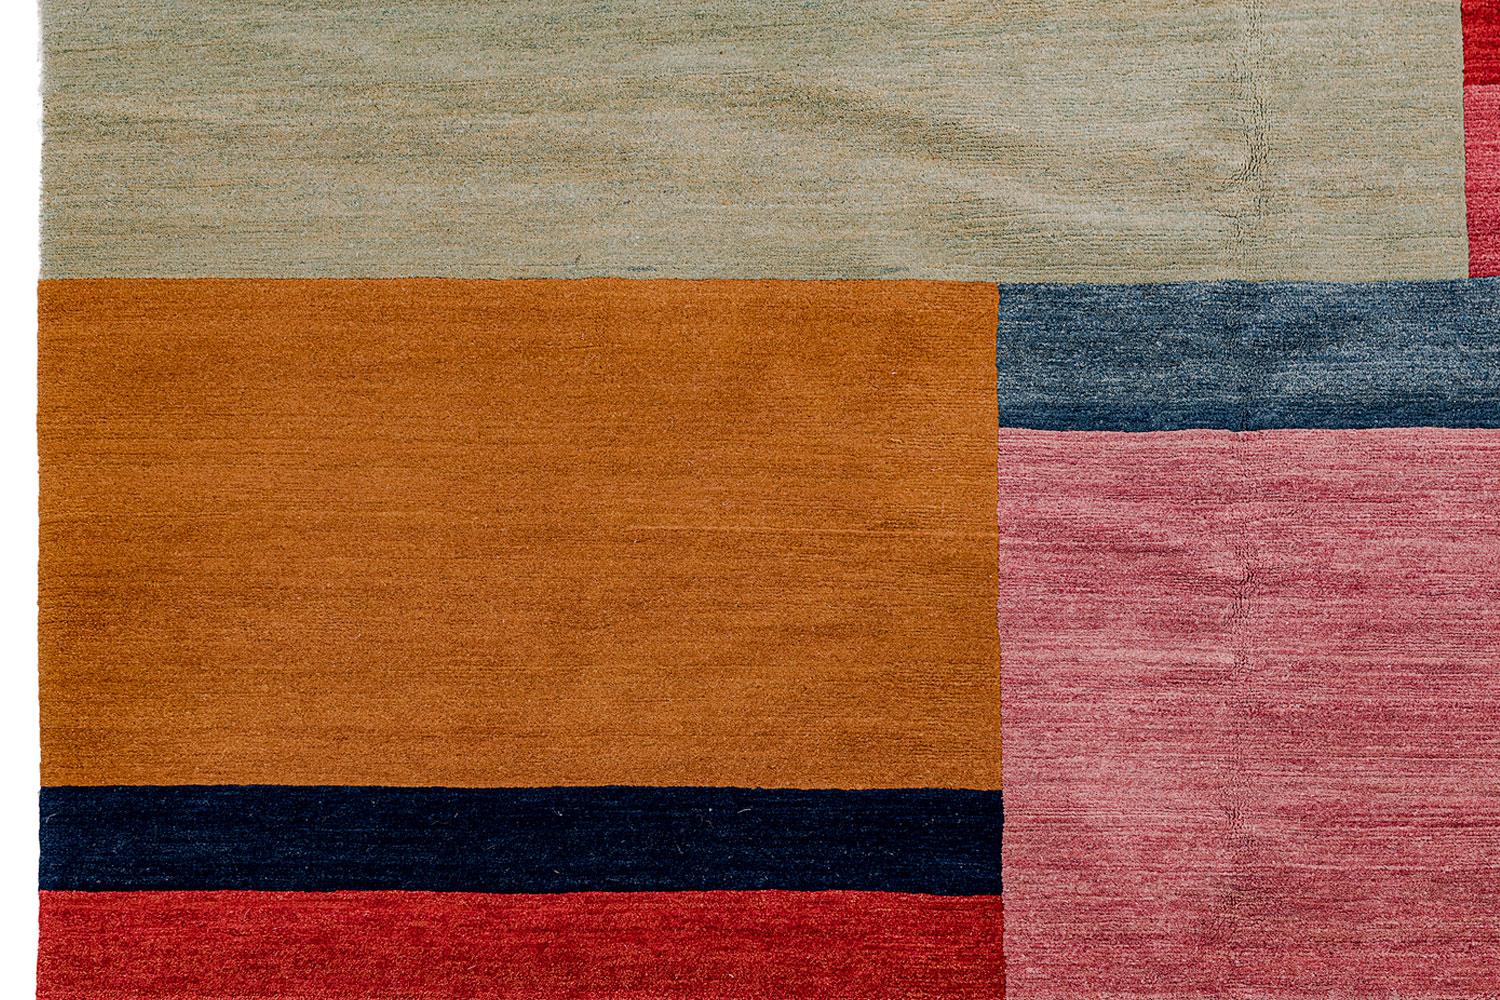 Youngtse-La Pandgen plateau rug by Odegard
This rug is hand-knotted Himalayan vegetable dyed wool and part of Odegard’s Textures In Geometry Collection. Selected wearing techniques are mixed with geometric forms to products designs that visually